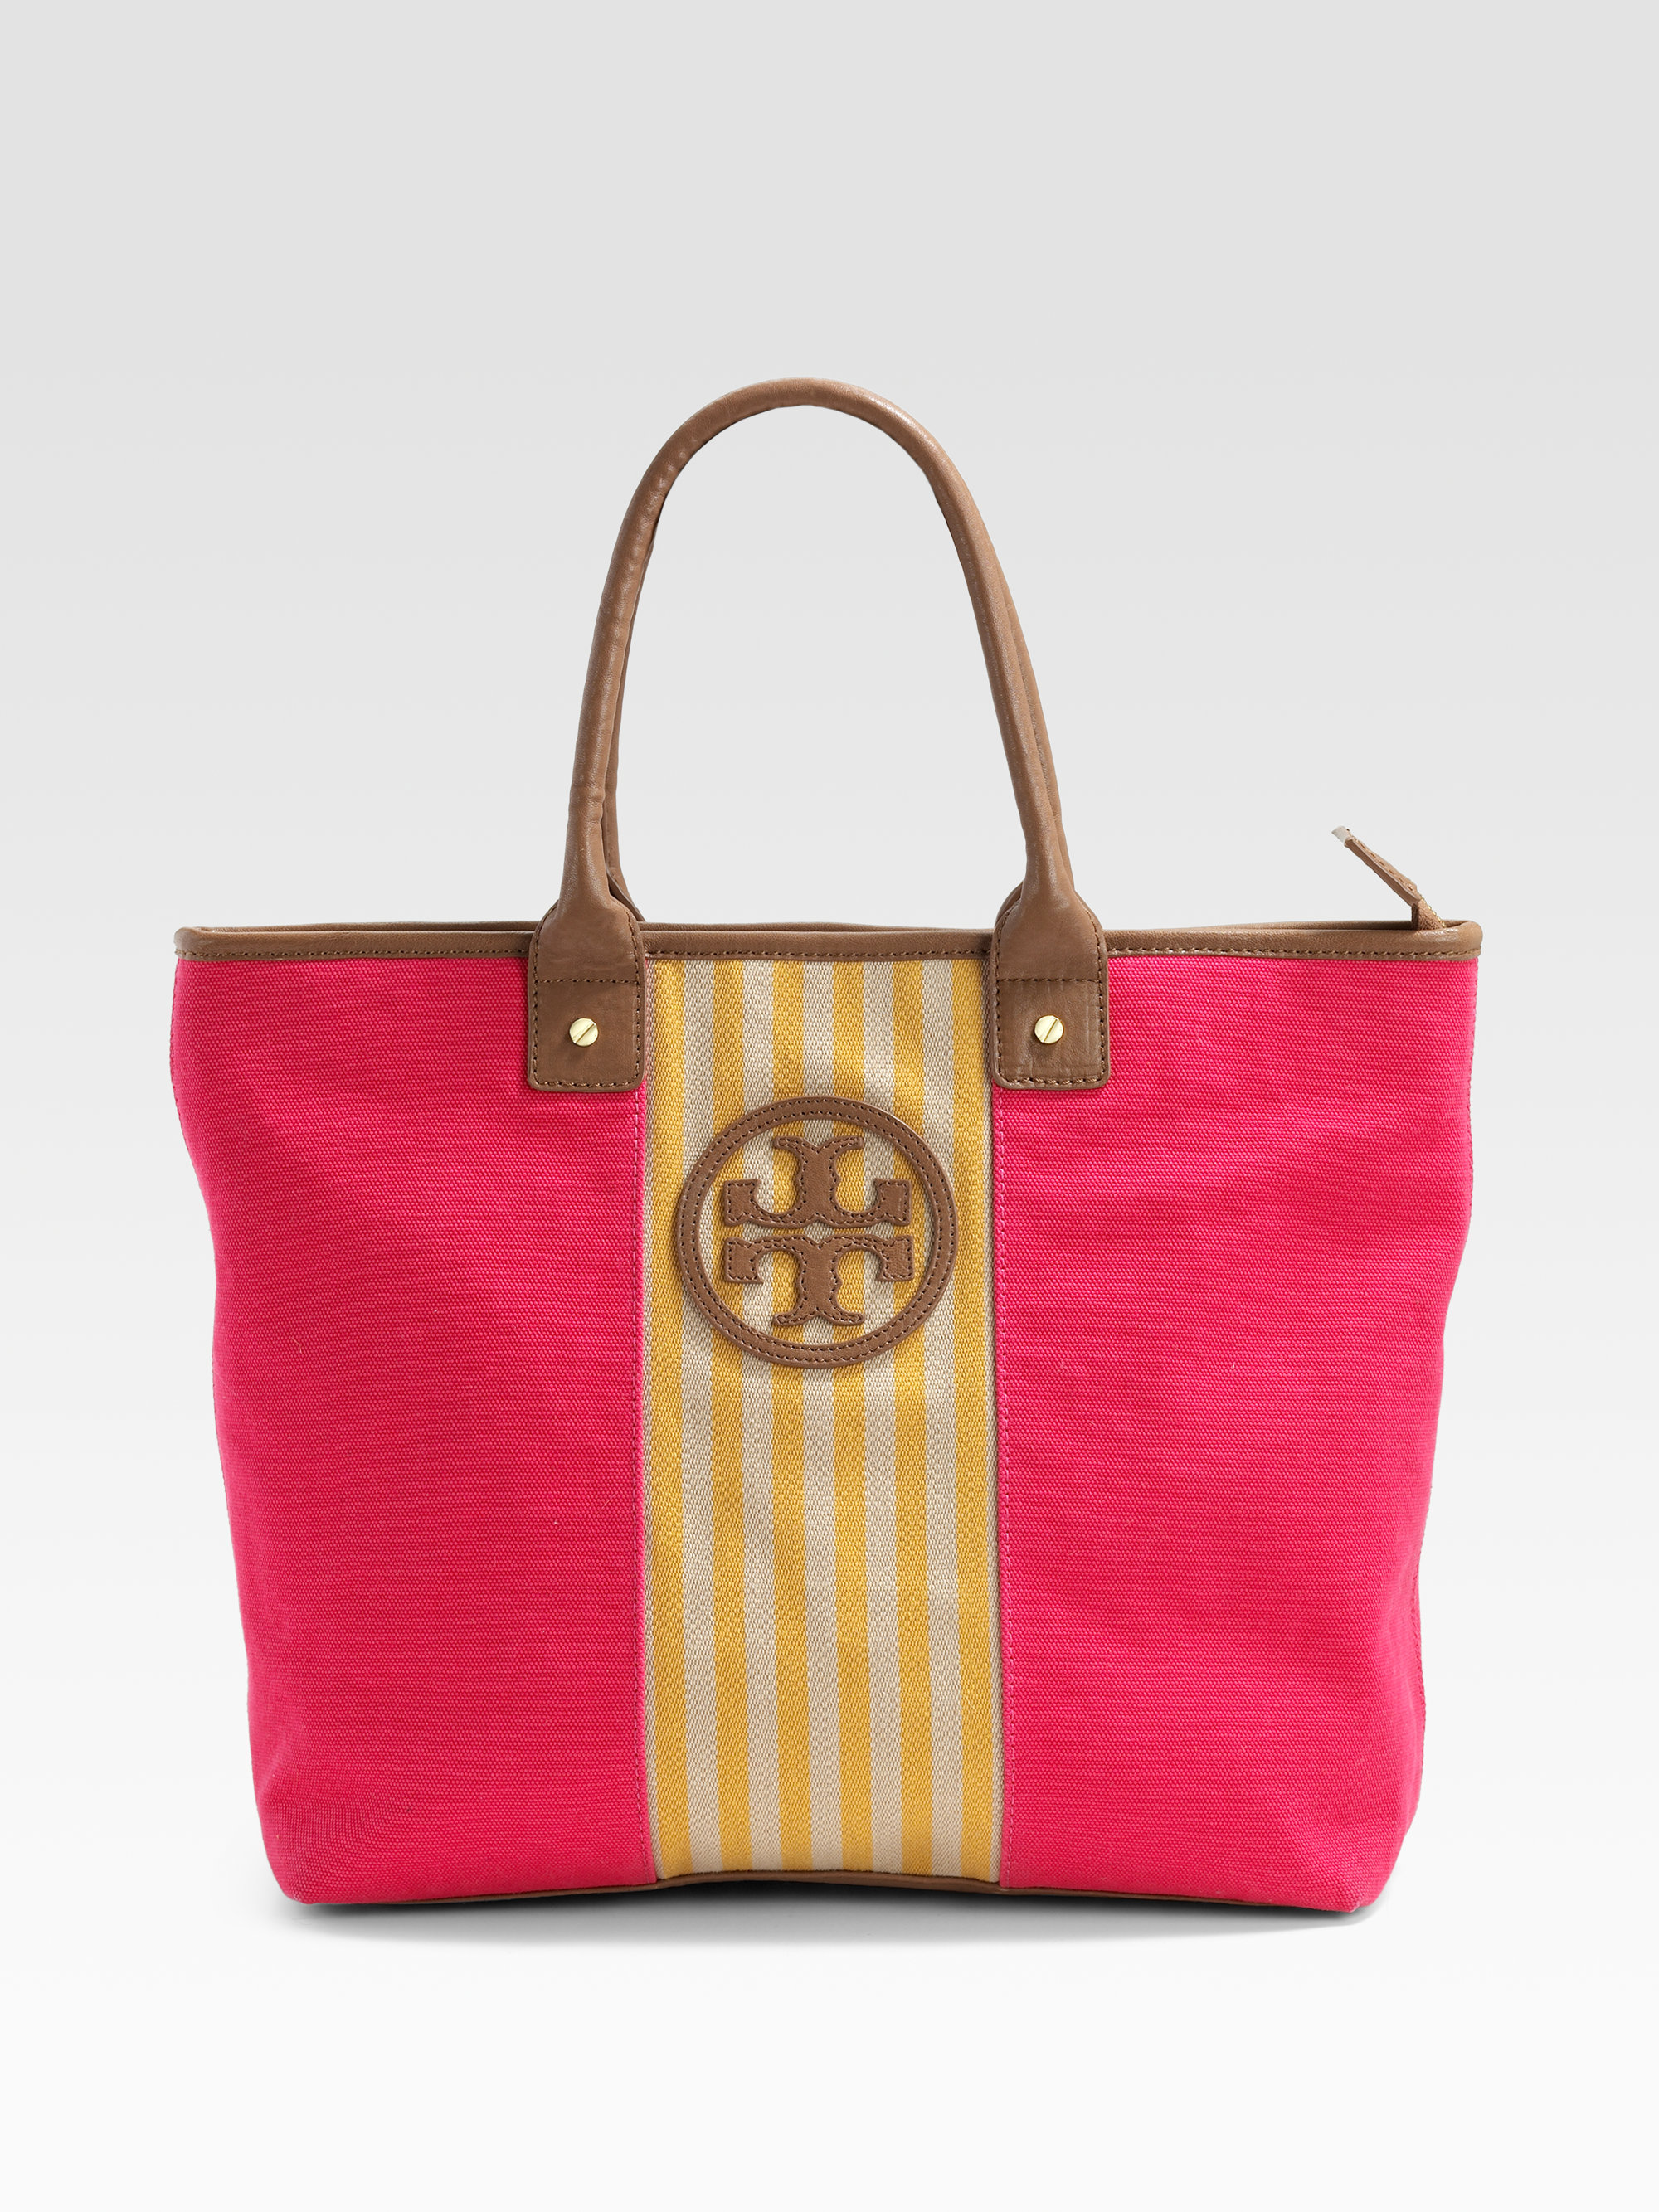 Tory Burch Jaden Canvas Tote in Pink - Lyst